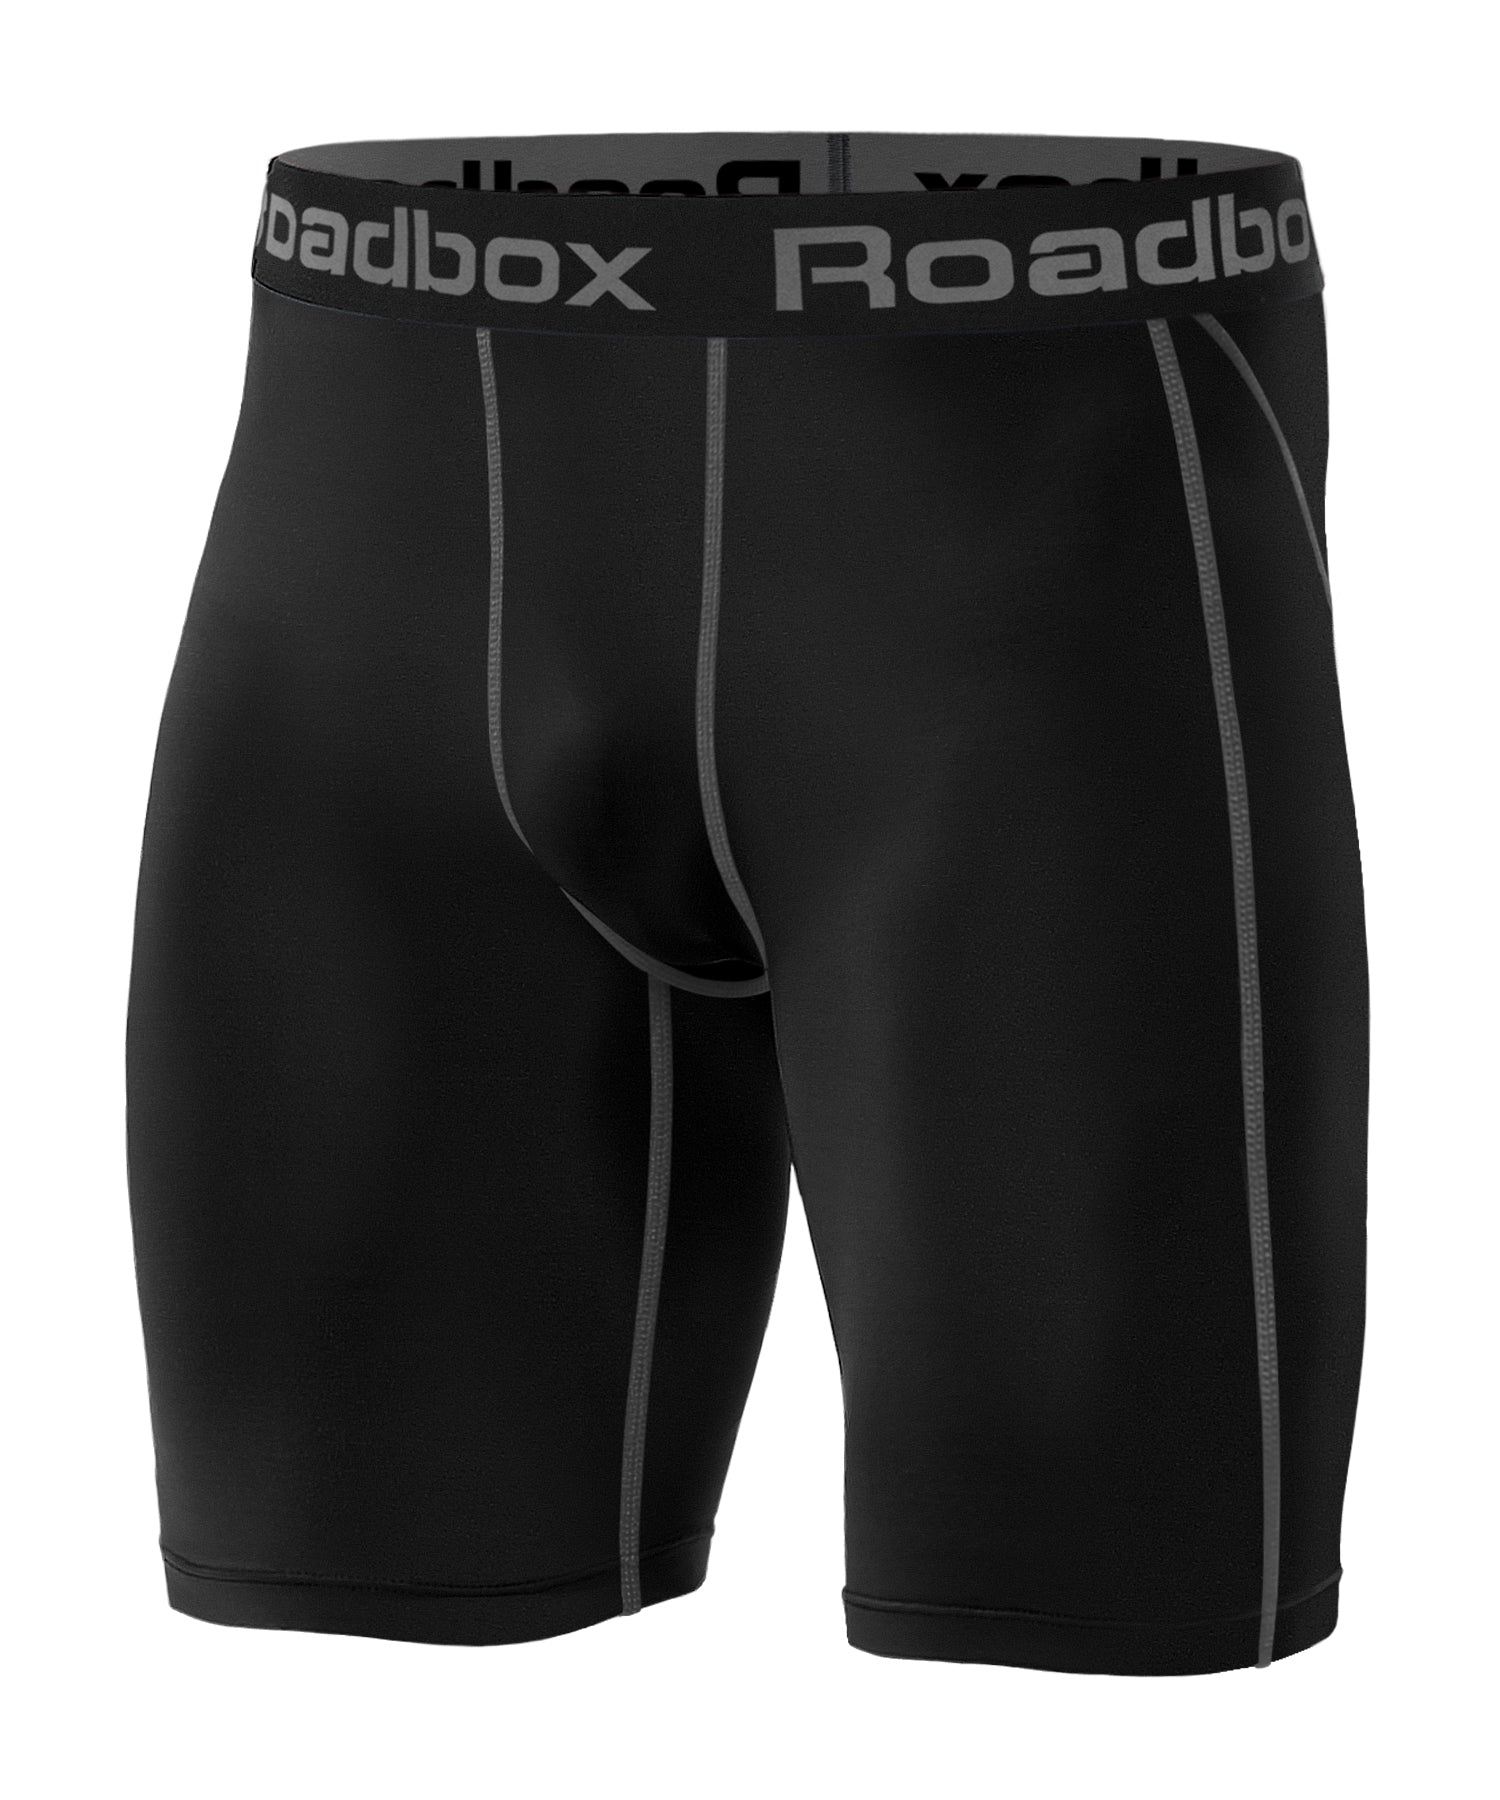 Roadbox Compression Shorts for Men - Cool Dry Athletic Workout Underwear Running Gym Spandex Baselayer Boxer Briefs